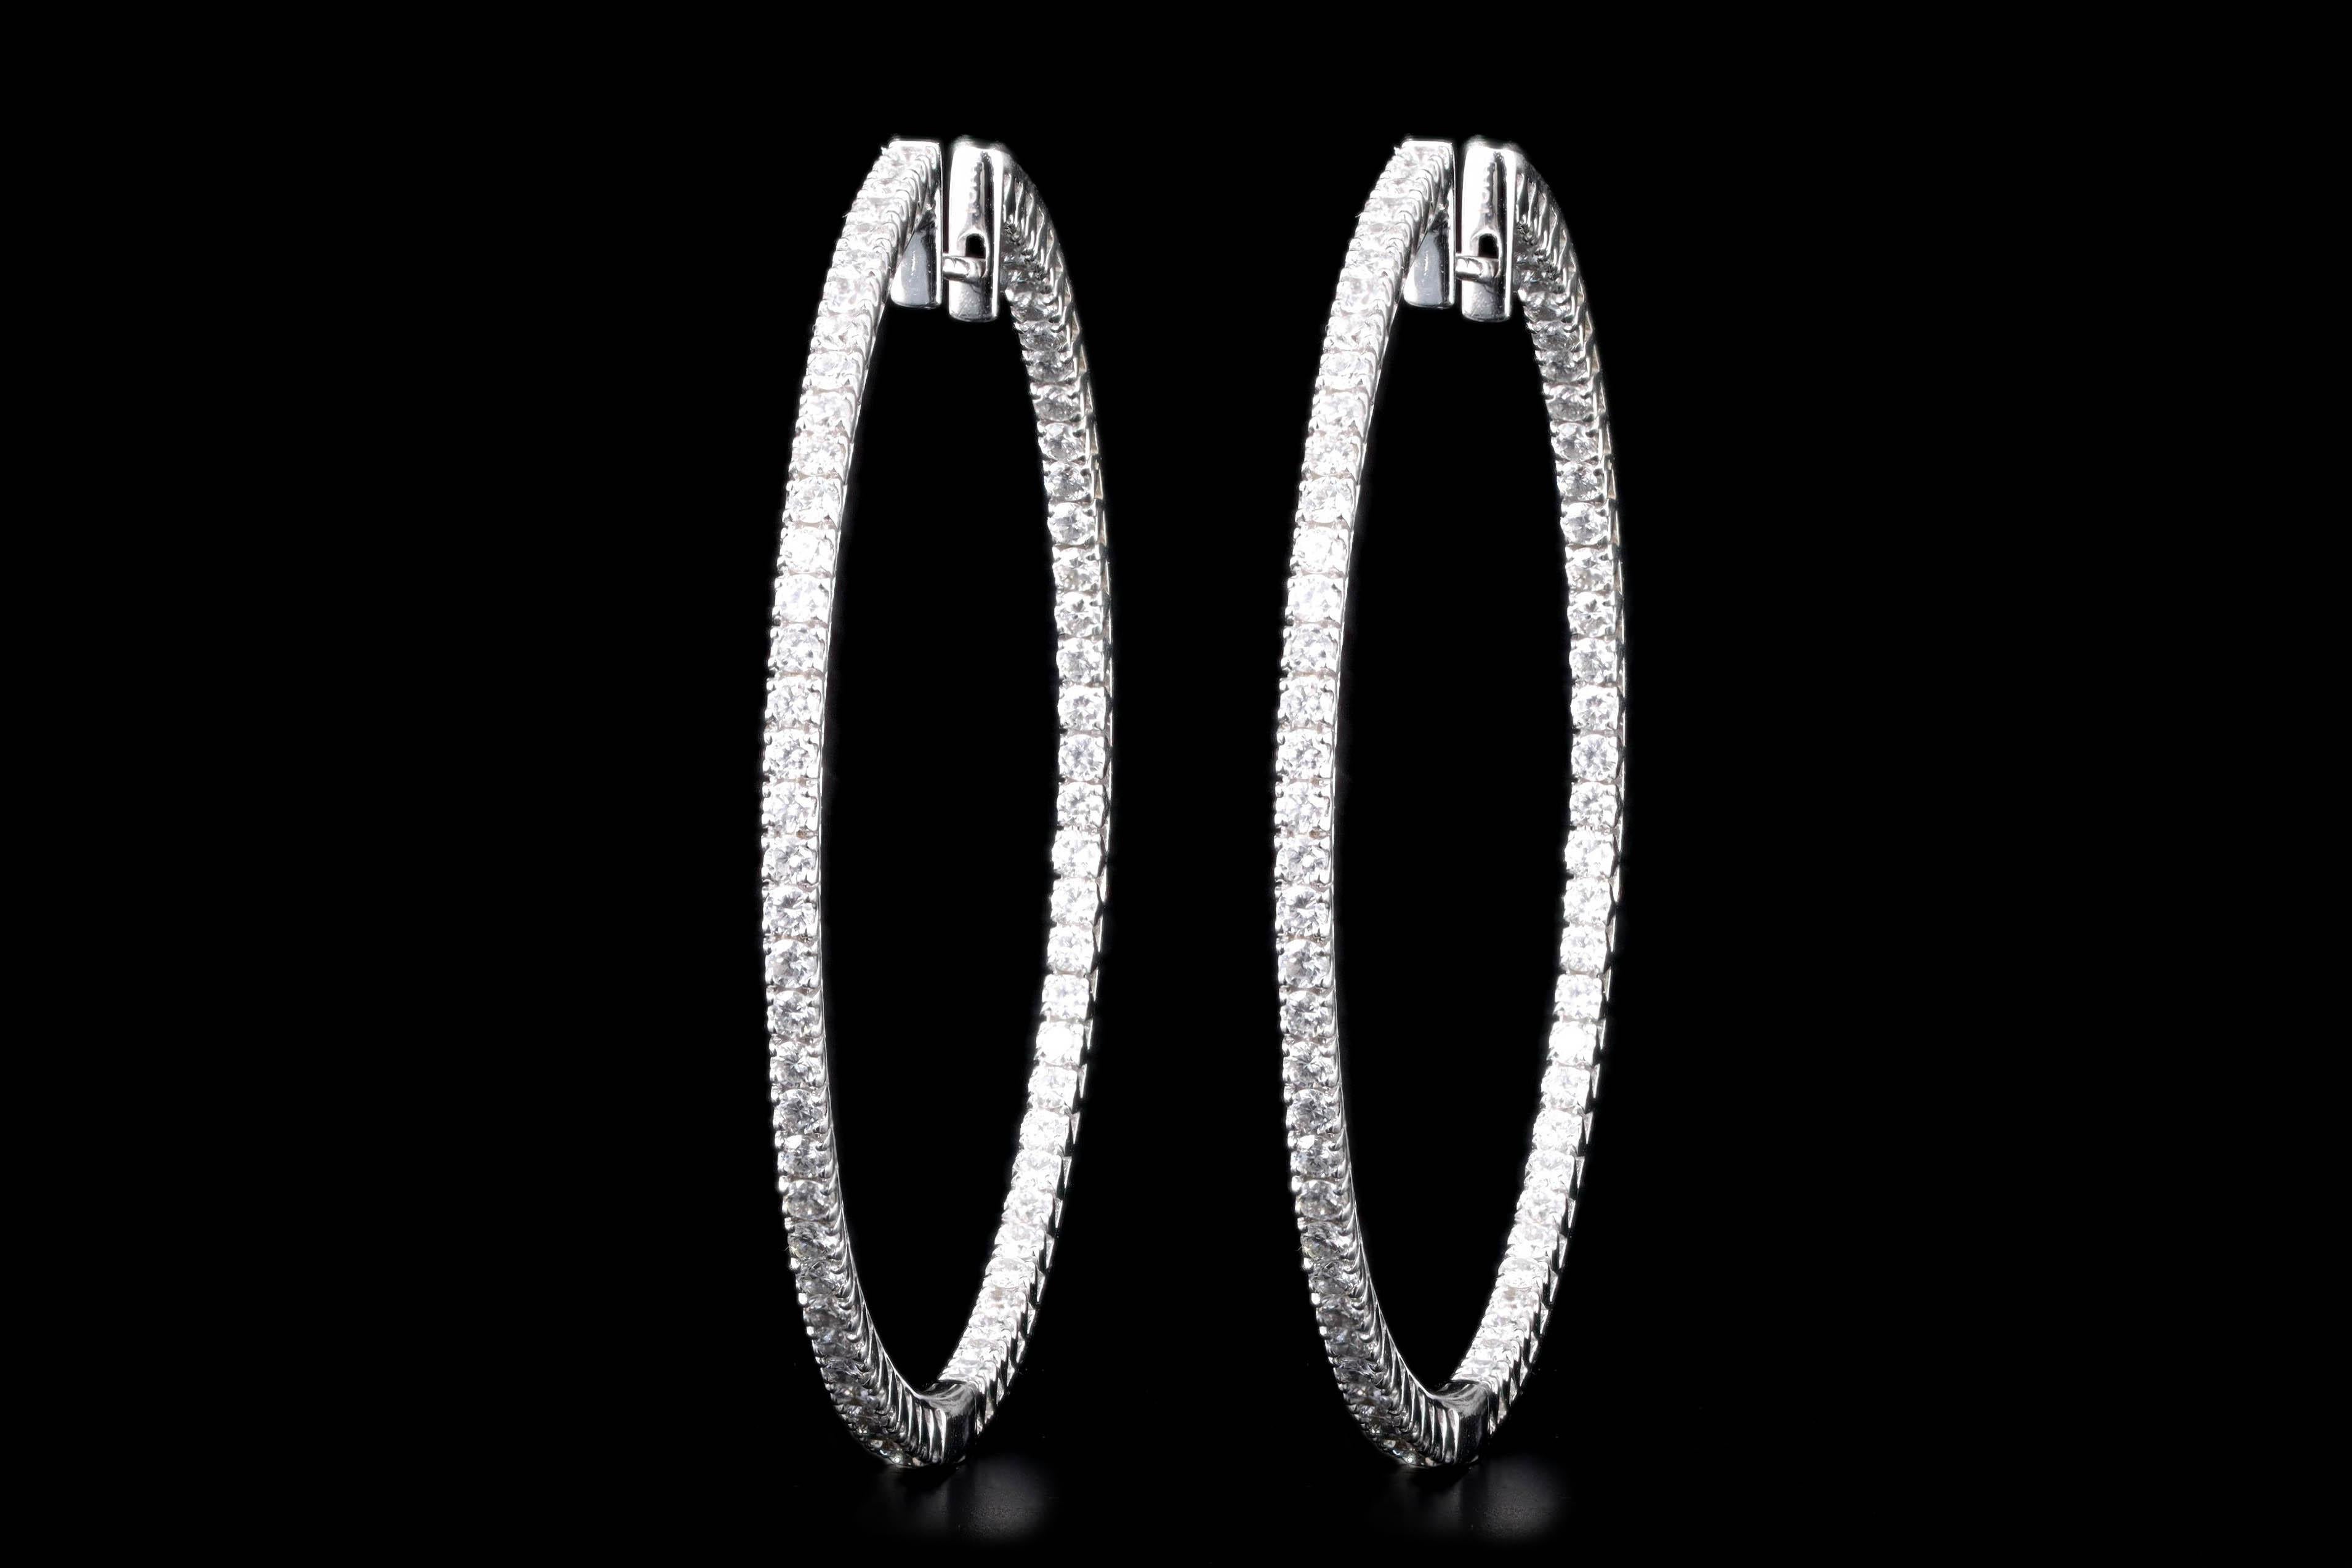 Era: Modern

Composition: 18K White Gold

Primary Stone: One Hundred Forty Two Round Brilliant Cut Cut Diamonds

Total Carat Weight: Approximately 2.2 Carats 

Color/Clarity: G-H / VS1-2

Earring Diameter: 1.8 Inches

Earring Weight: 11.7